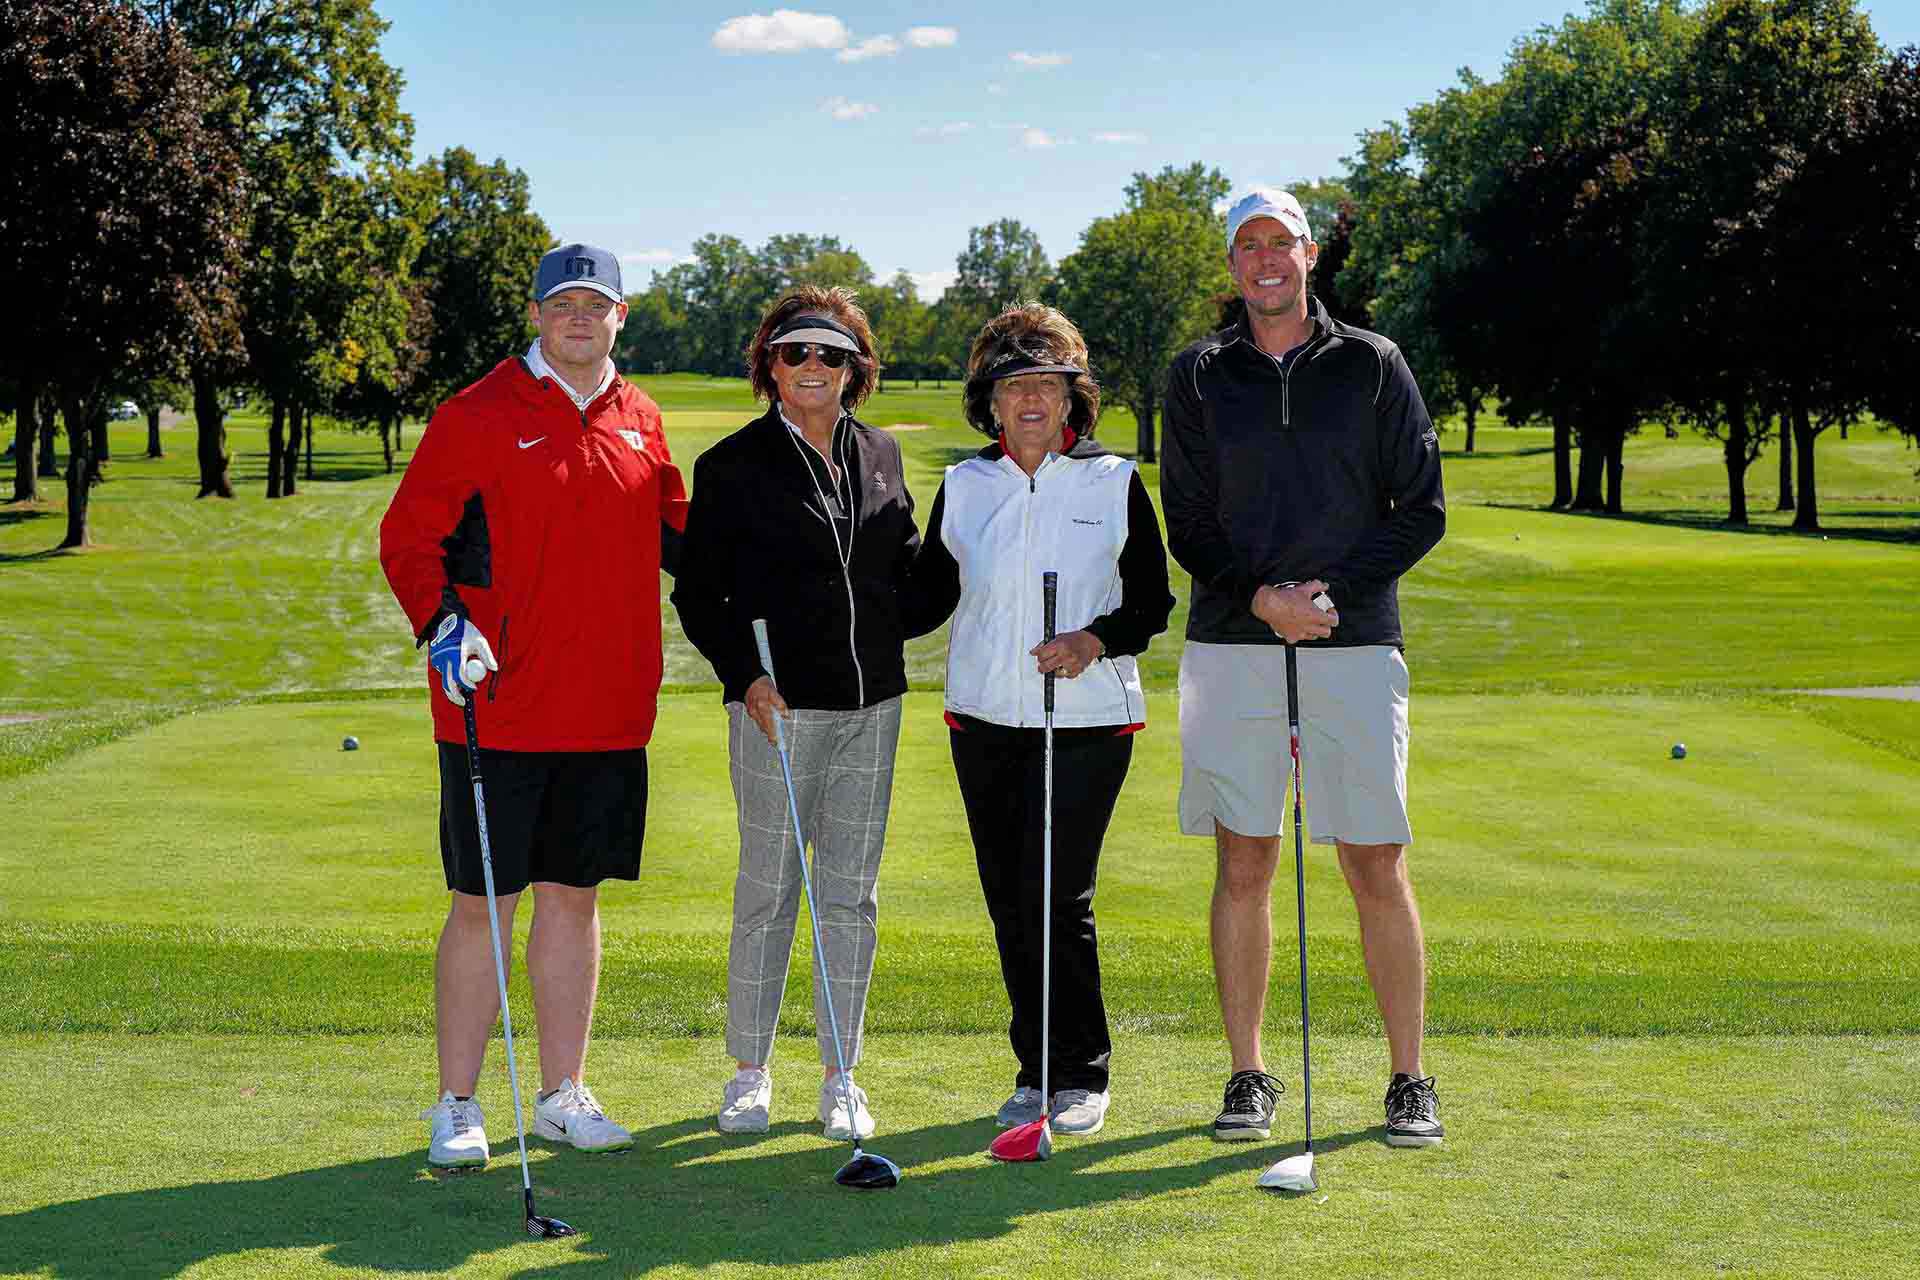 2020-endownment-classic-smiling-group-on-golf-course